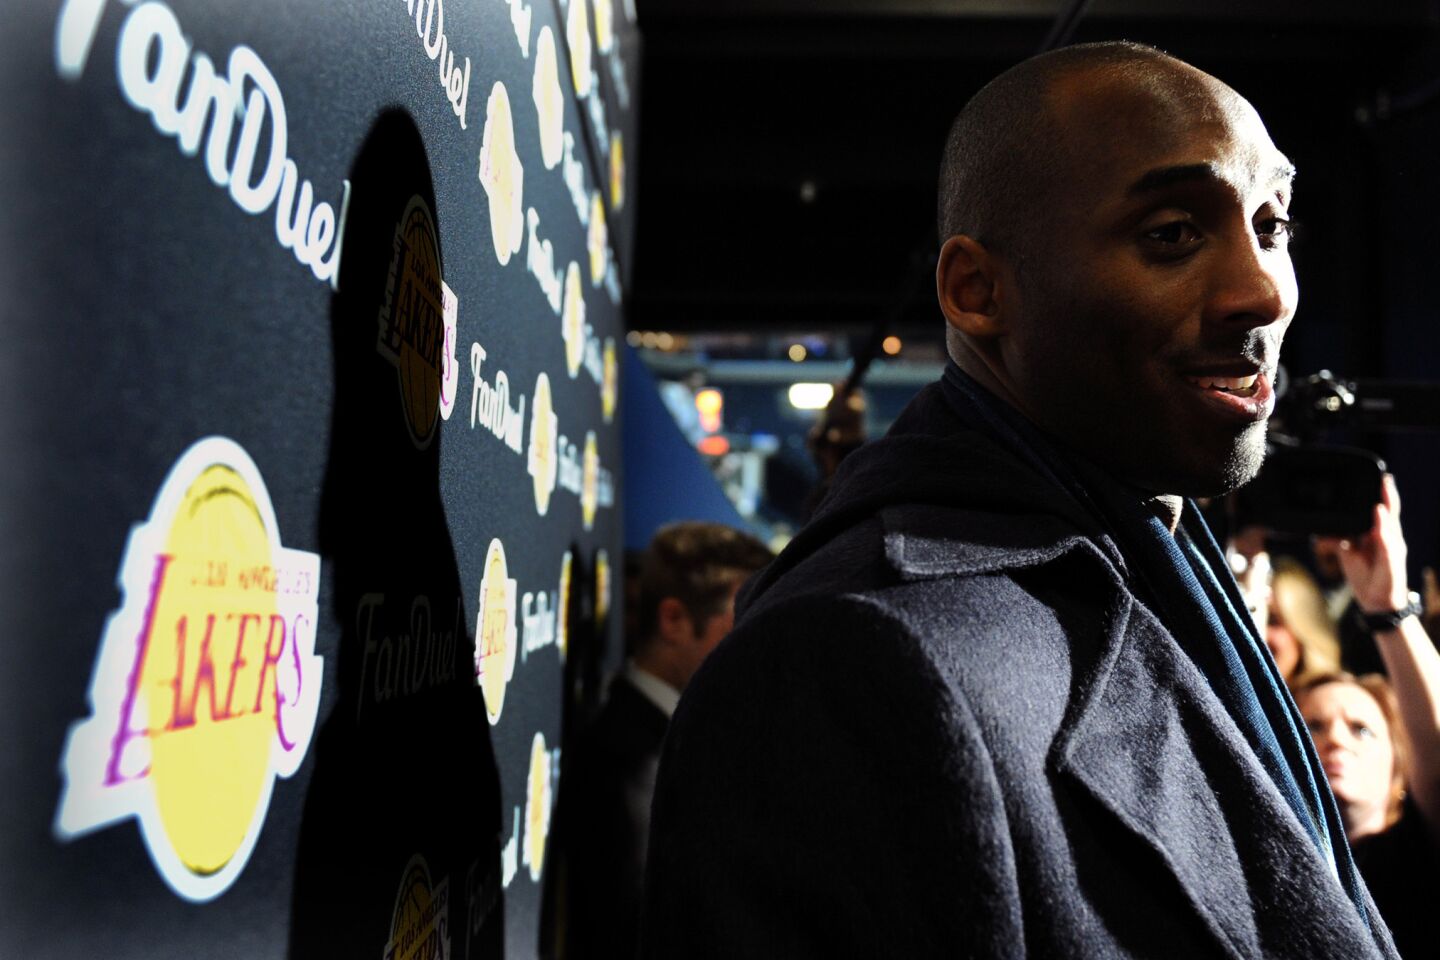 Kobe Bryant talks to the media before the Lakers played the Grizzlies in Memphis, Tenn., on Feb. 24, 2016.